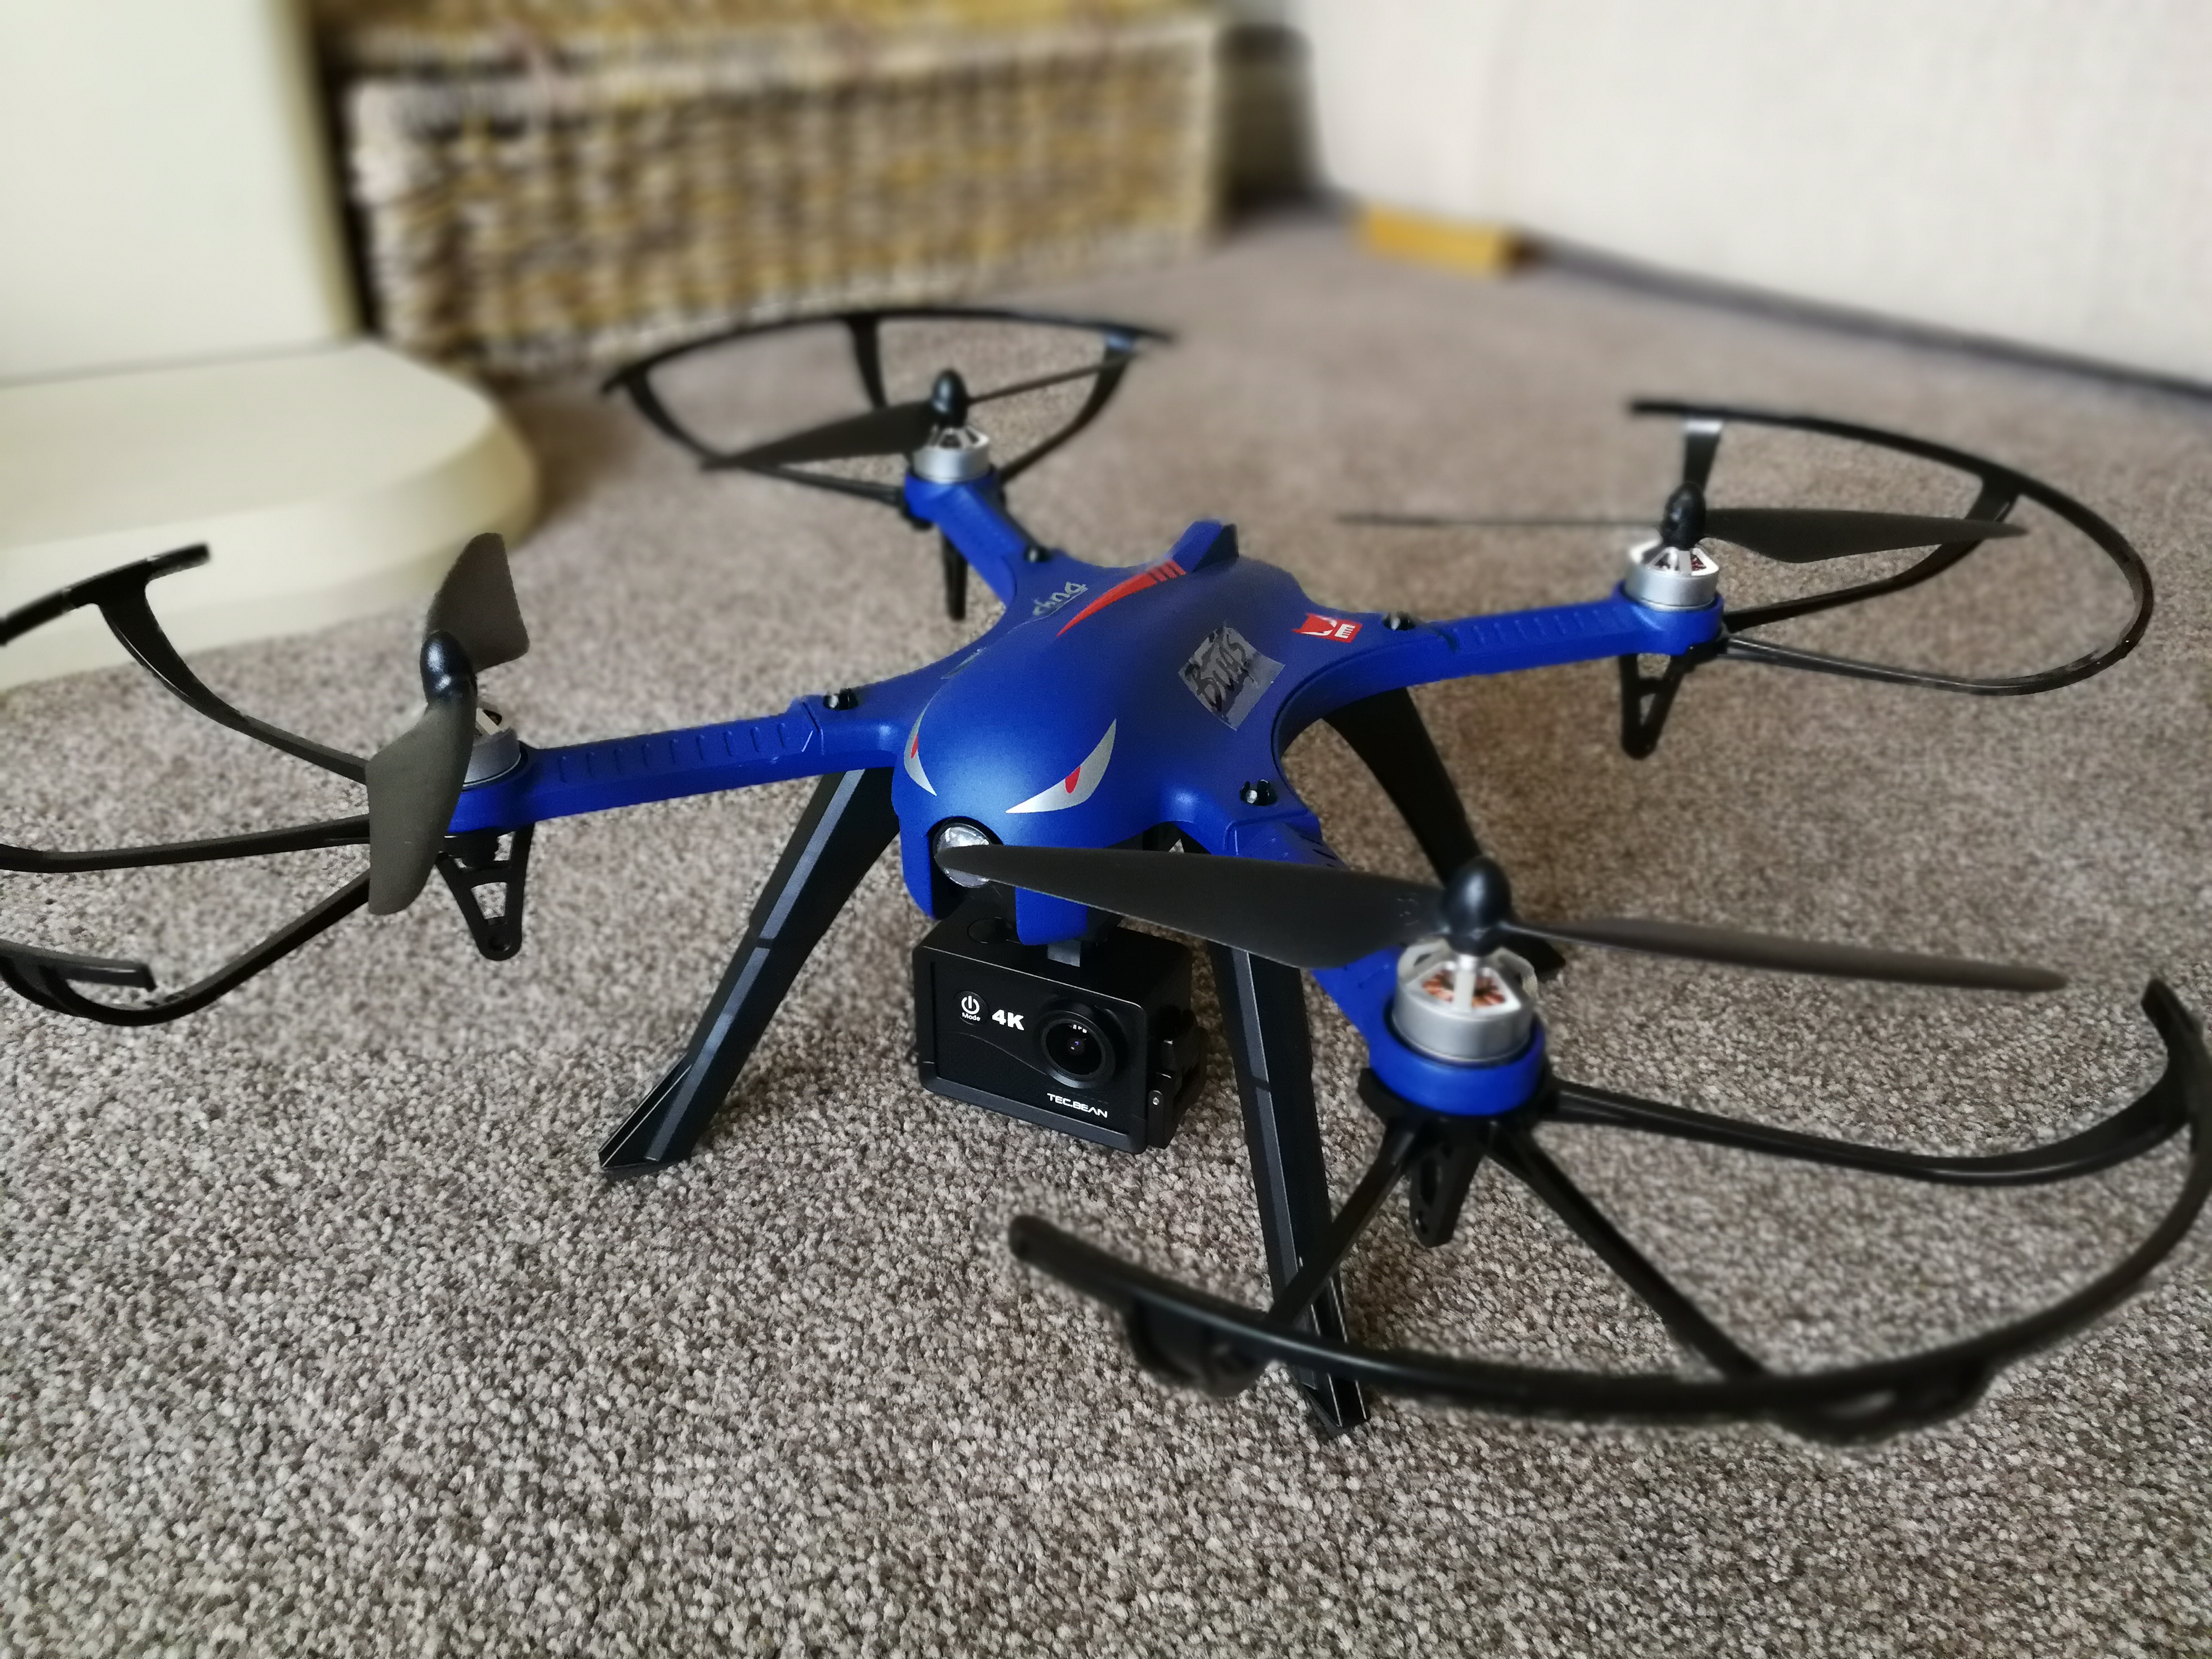 bugs 3 drone review